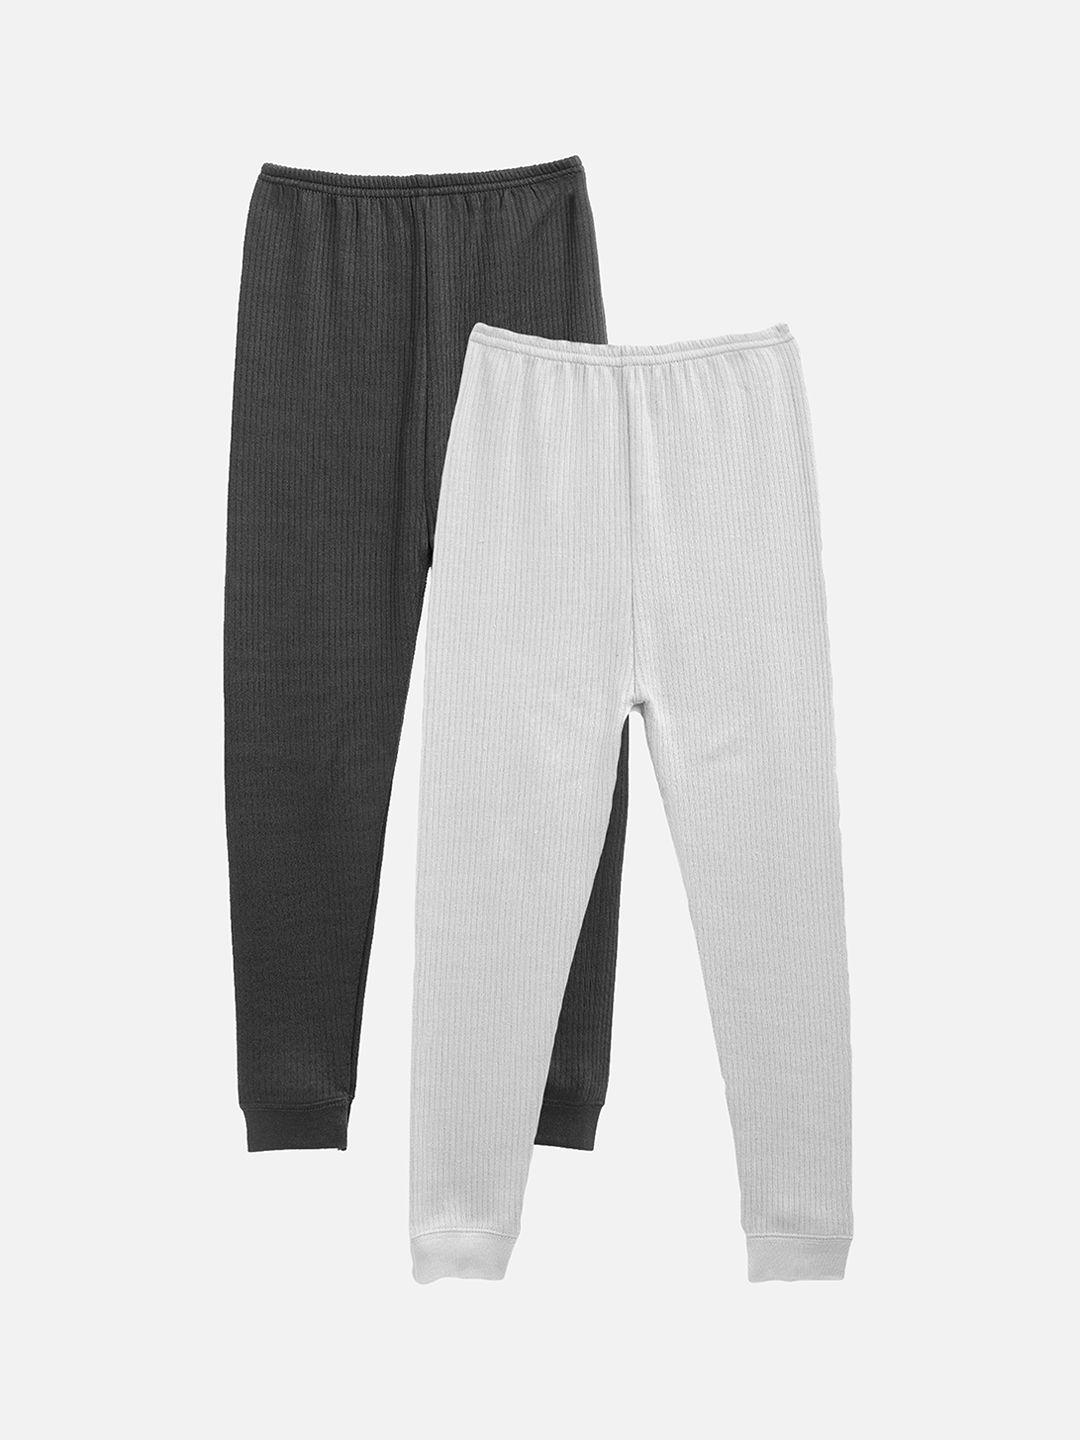 kanvin-boys-pack-of-2-charcoal-&-grey-solid-thermal-bottoms